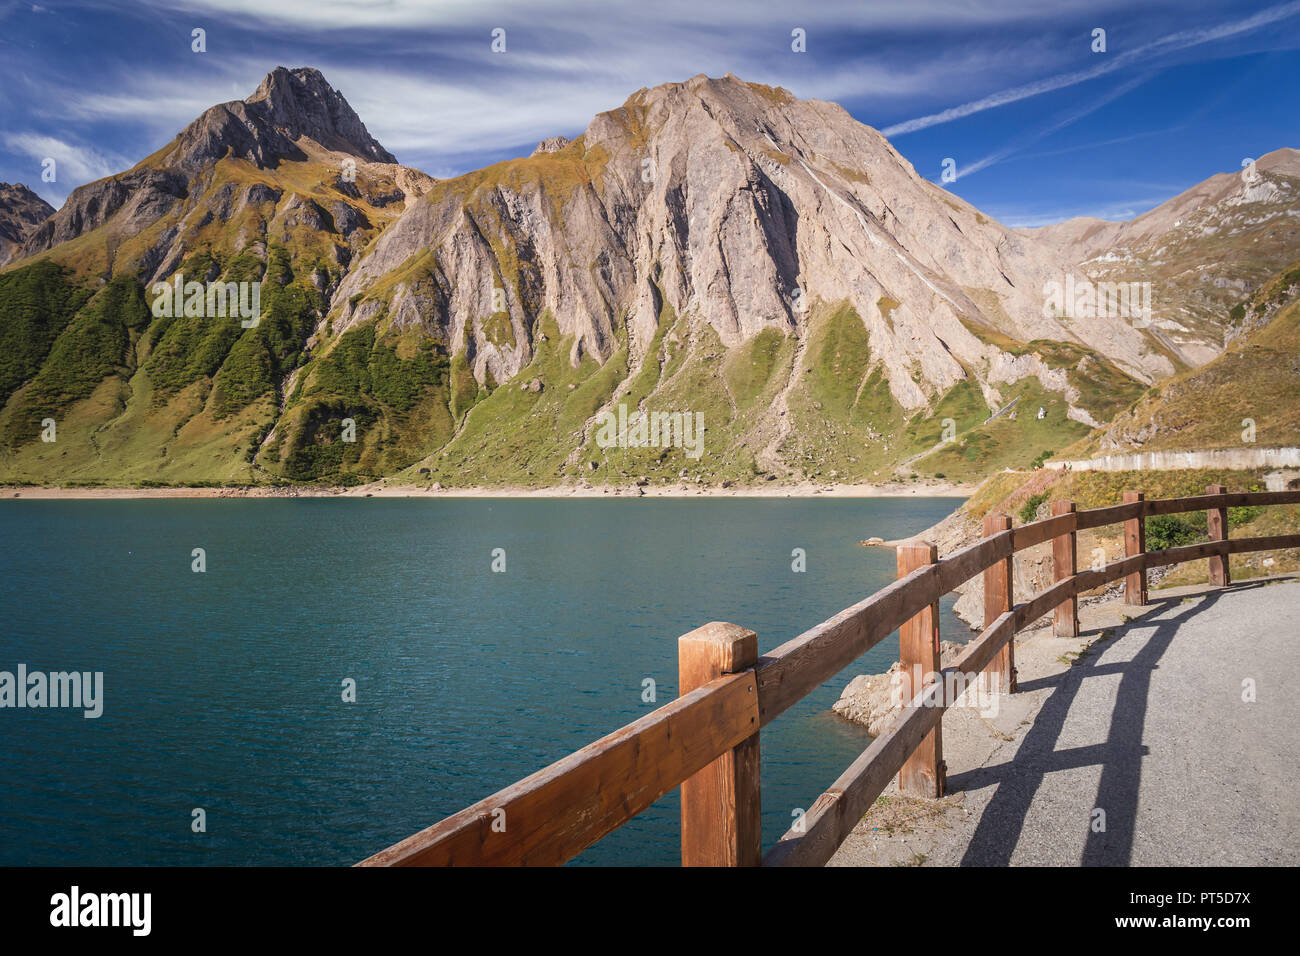 Dam and Lake of Morasco with great mountain on the background seen in a beautiful day of summer season, Riale - Formazza Valley, Piedmont, Italy Stock Photo